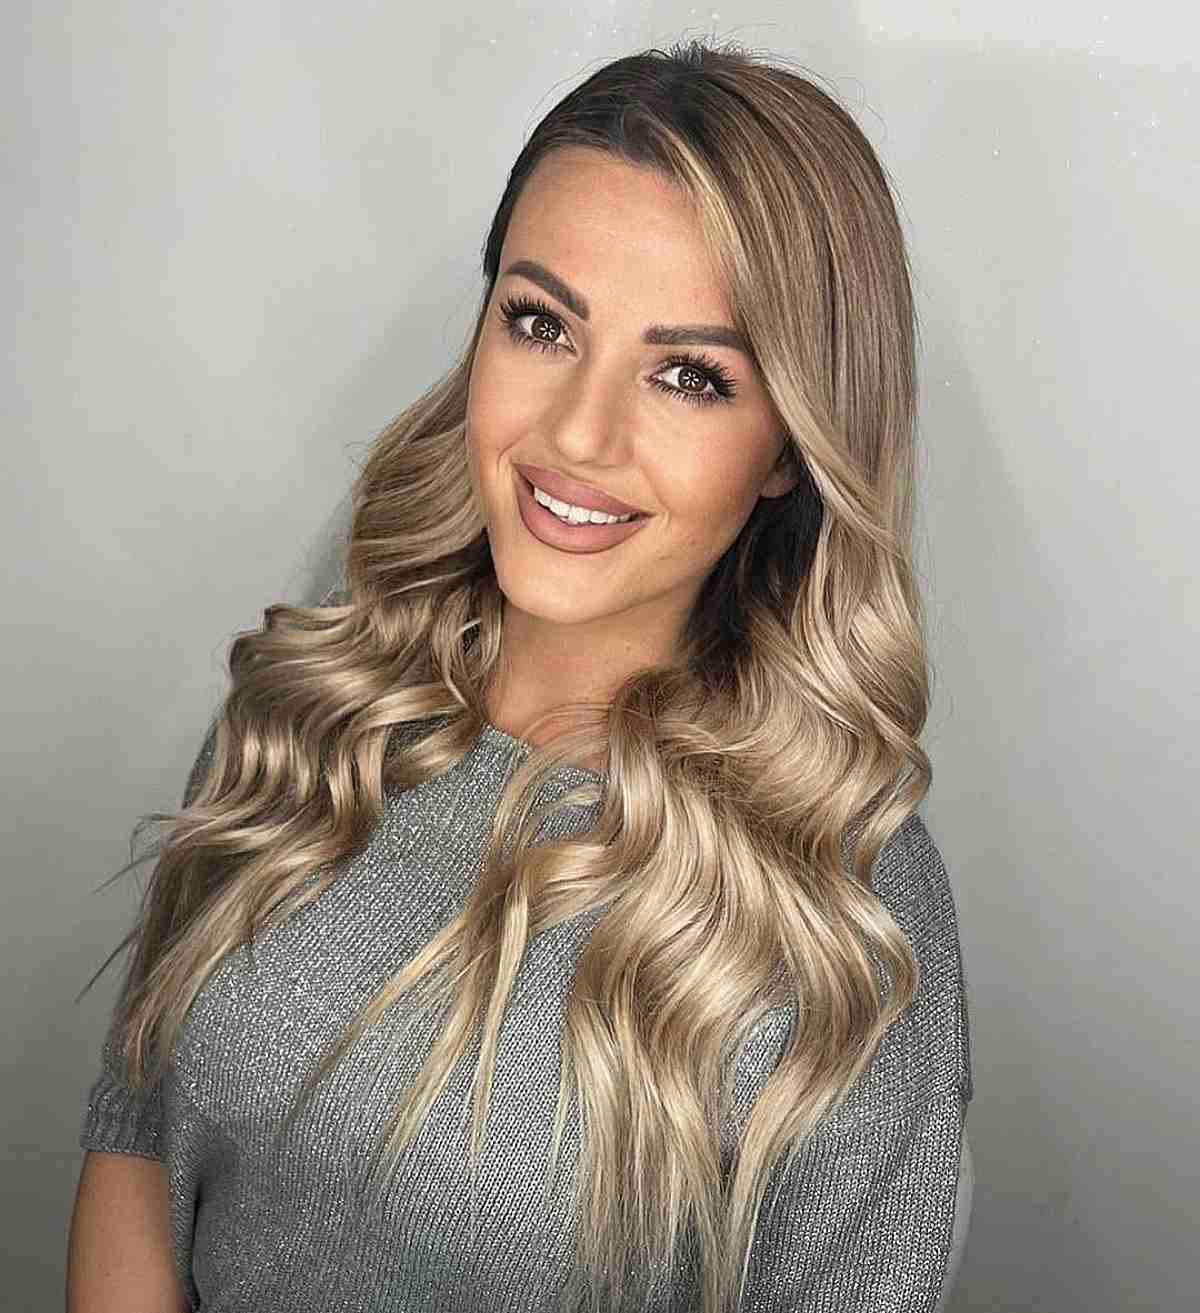 Dark Blonde Long Hair with Curled Ends